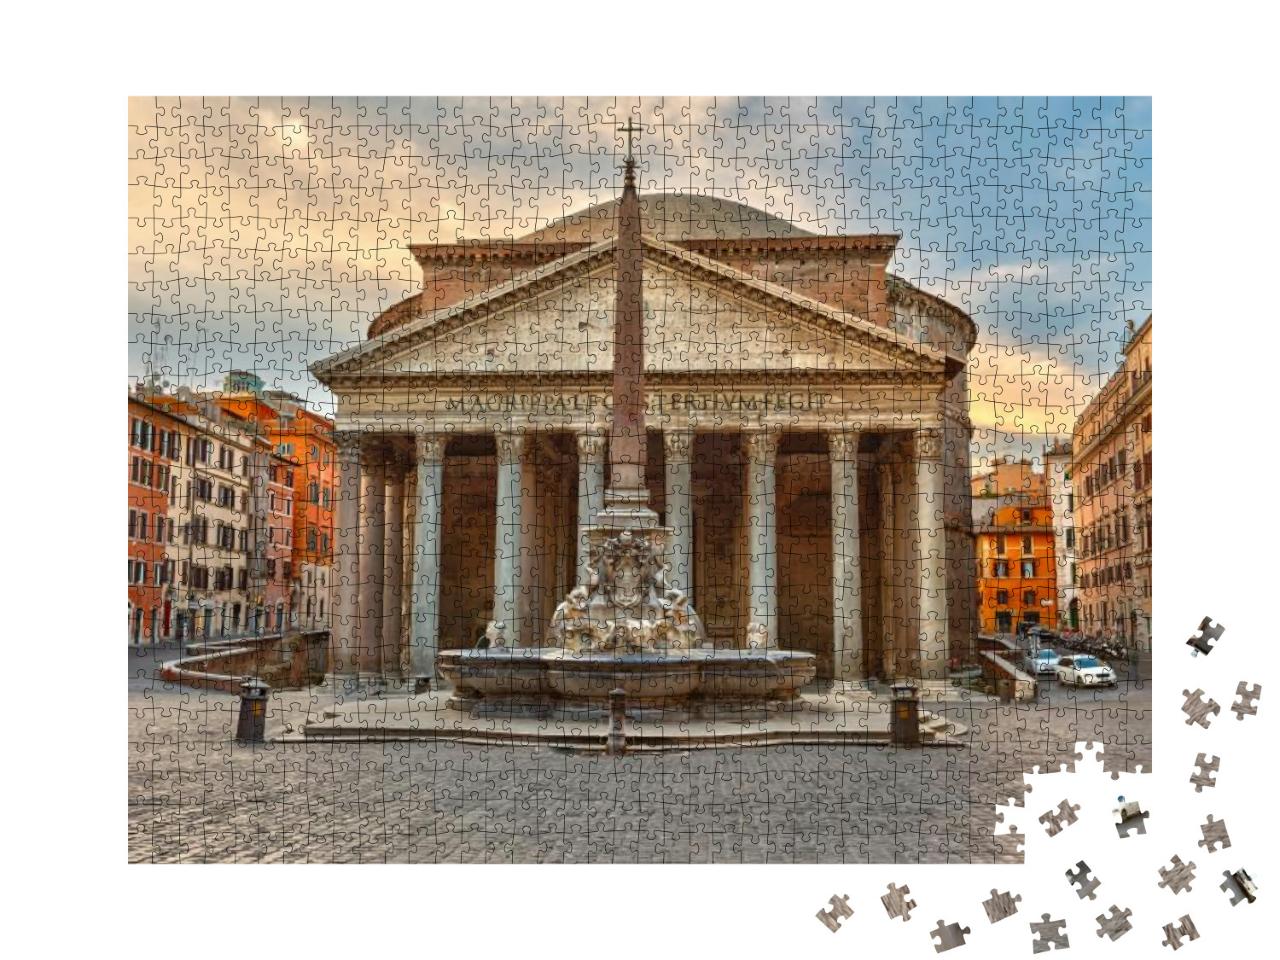 Pantheon in Rome, Italy... Jigsaw Puzzle with 1000 pieces